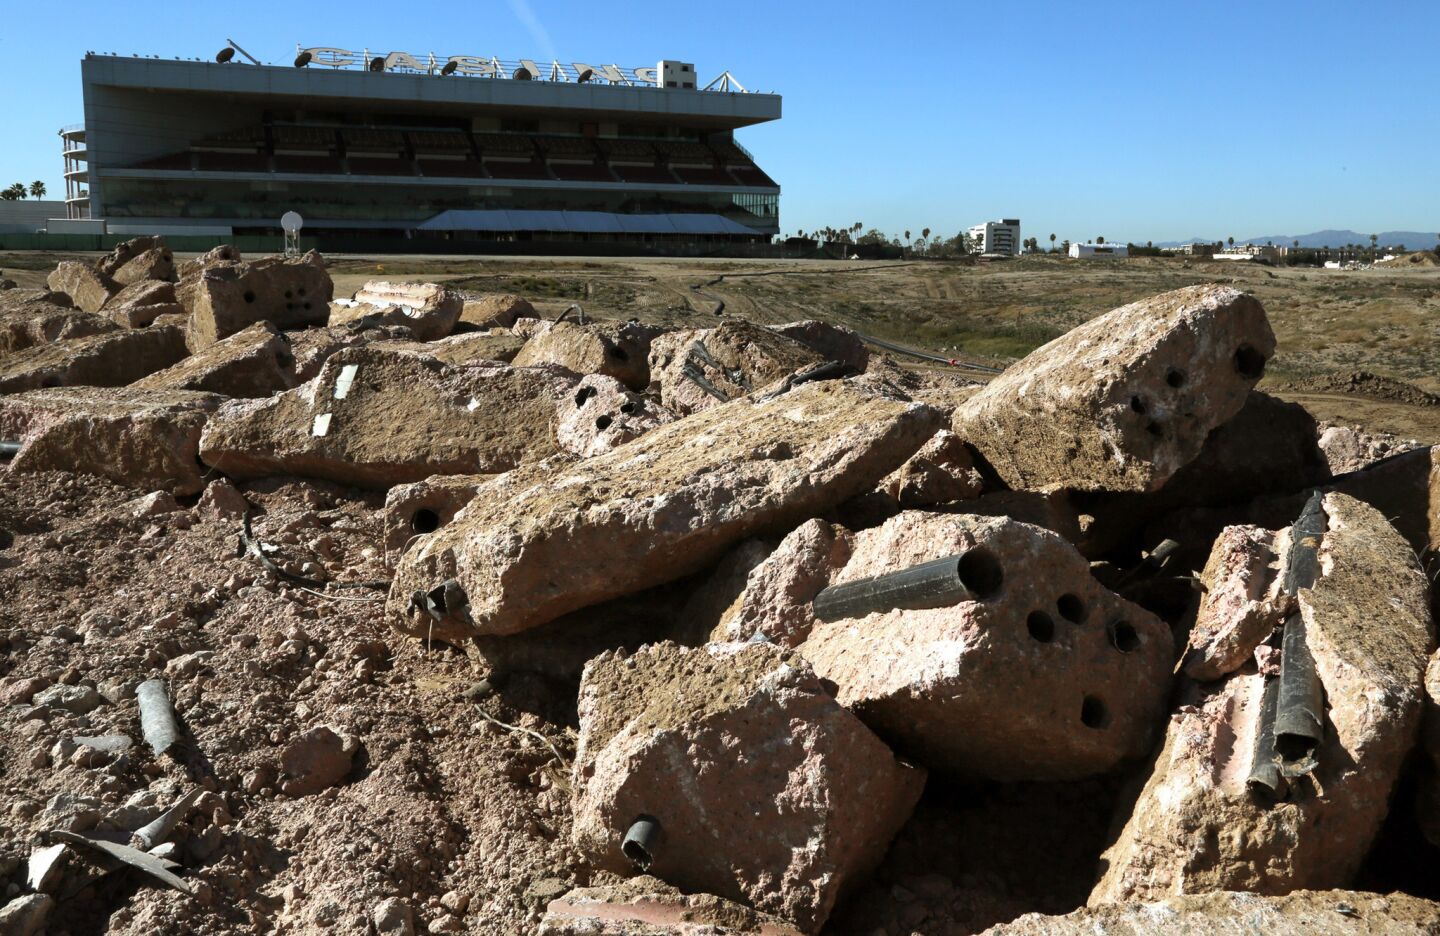 Chunks of concrete will eventually be crushed and later used as roadbed at the former Hollywood Park site in Inglewood where an NFL stadium will eventually be constructed.